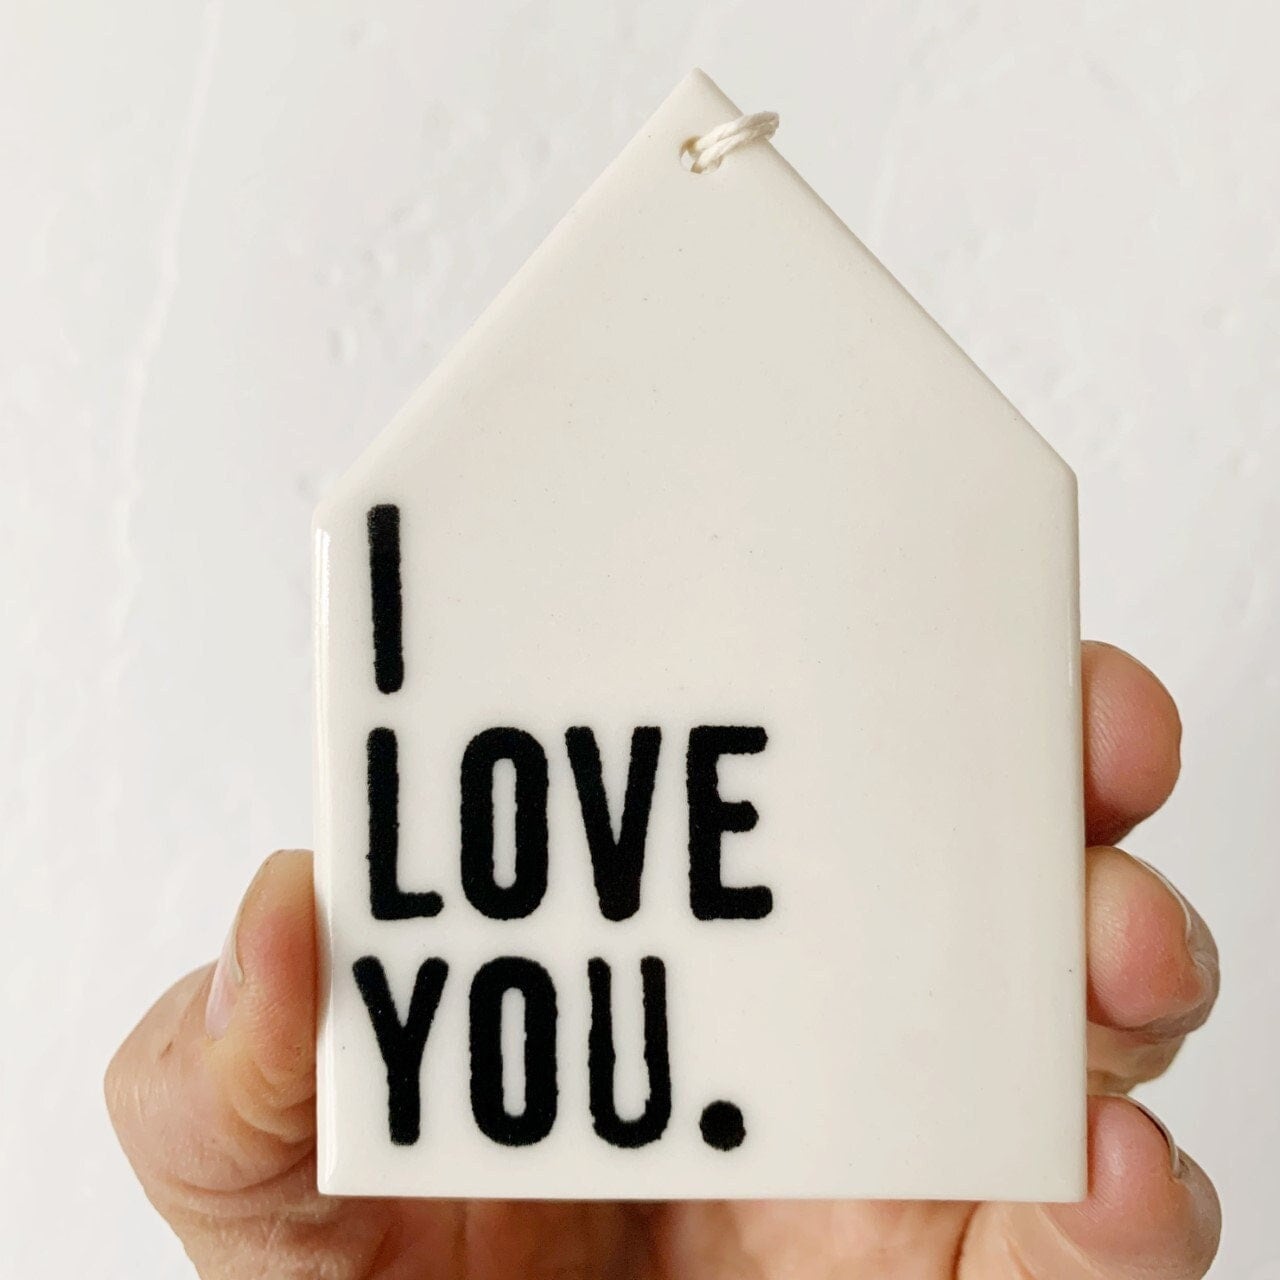 i love you | ceramic wall tag | screenprinted ceramics | meaningful gift | gift for son | gift for daughter | daily reminder | love quote